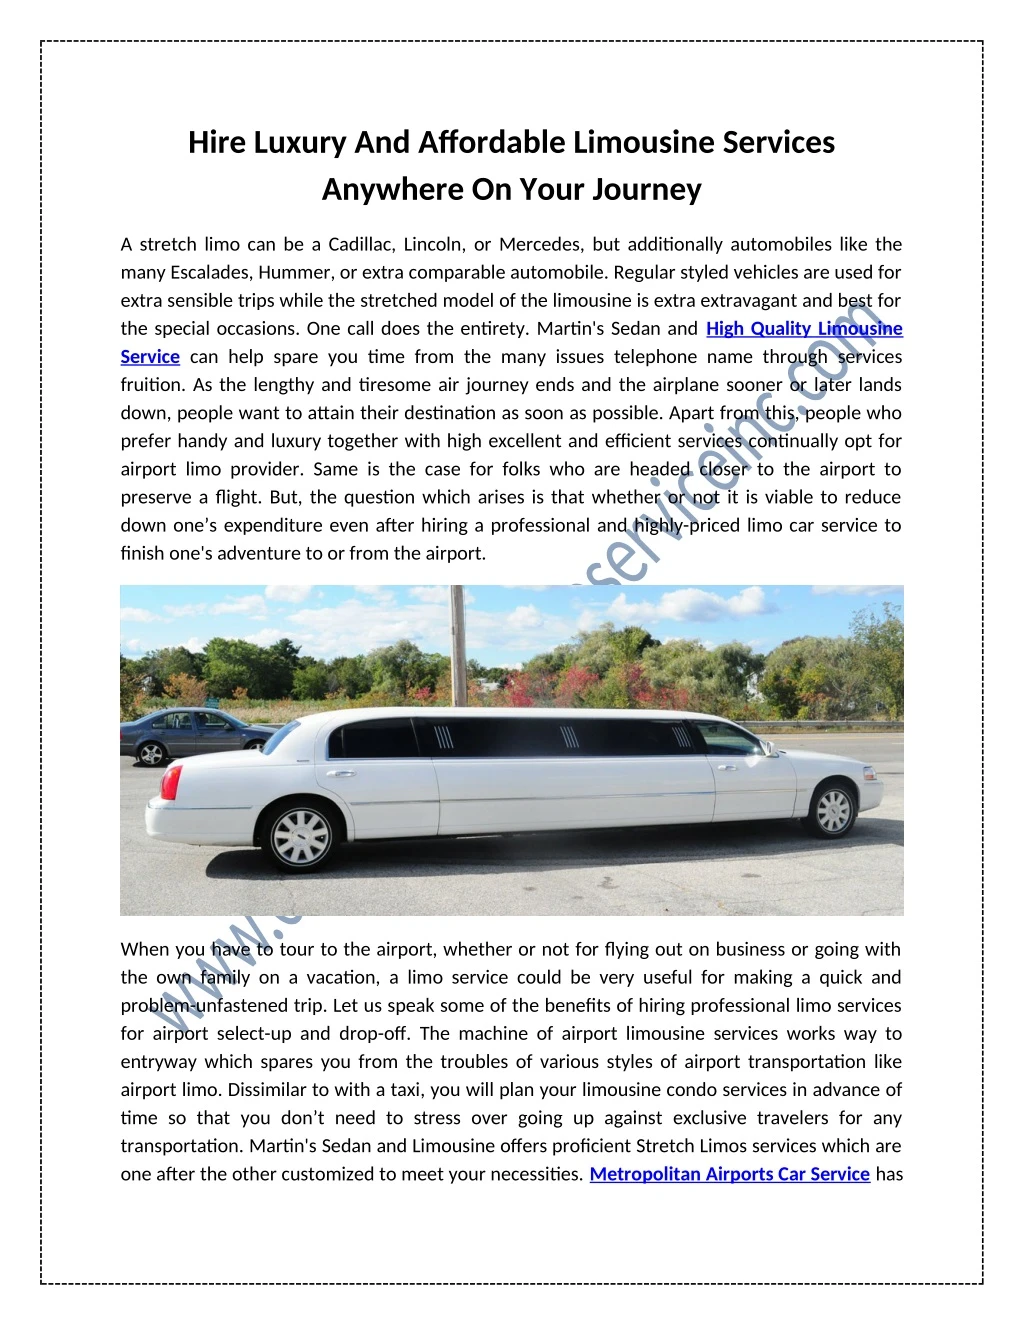 hire luxury and affordable limousine services